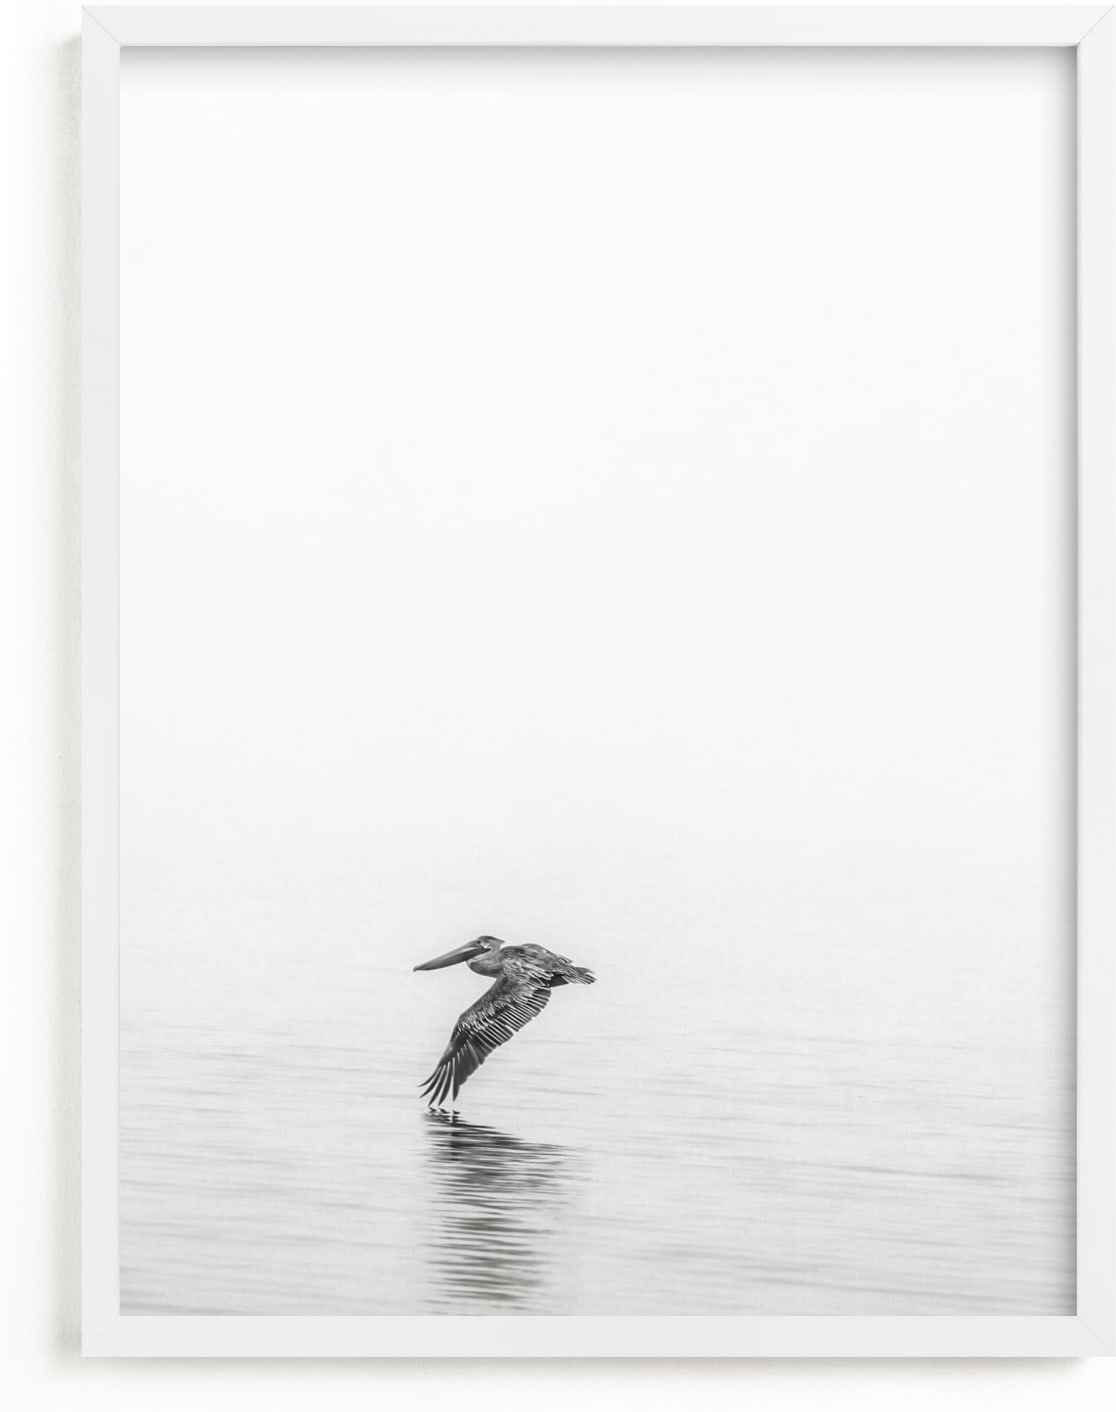 This is a black and white art by Mary Ann Glynn-Tusa called Pelican on Lake.